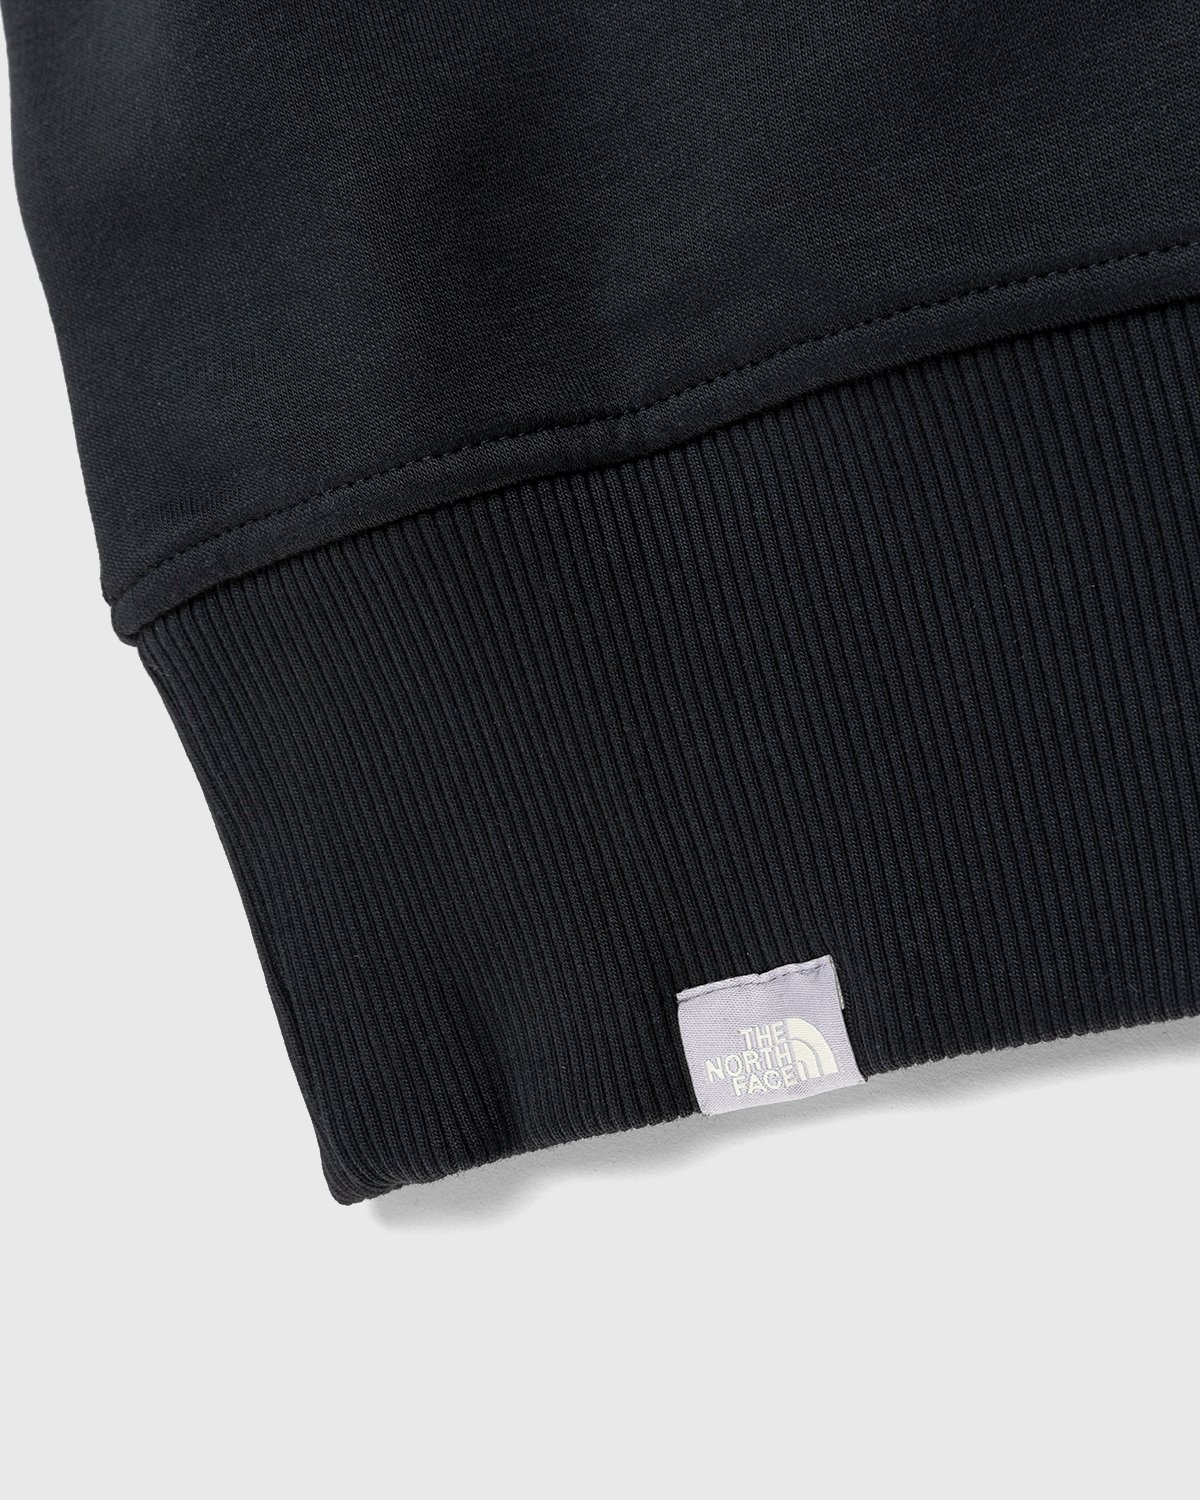 The North Face - Oversized Essential Hoodie Black - Clothing - Black - Image 4